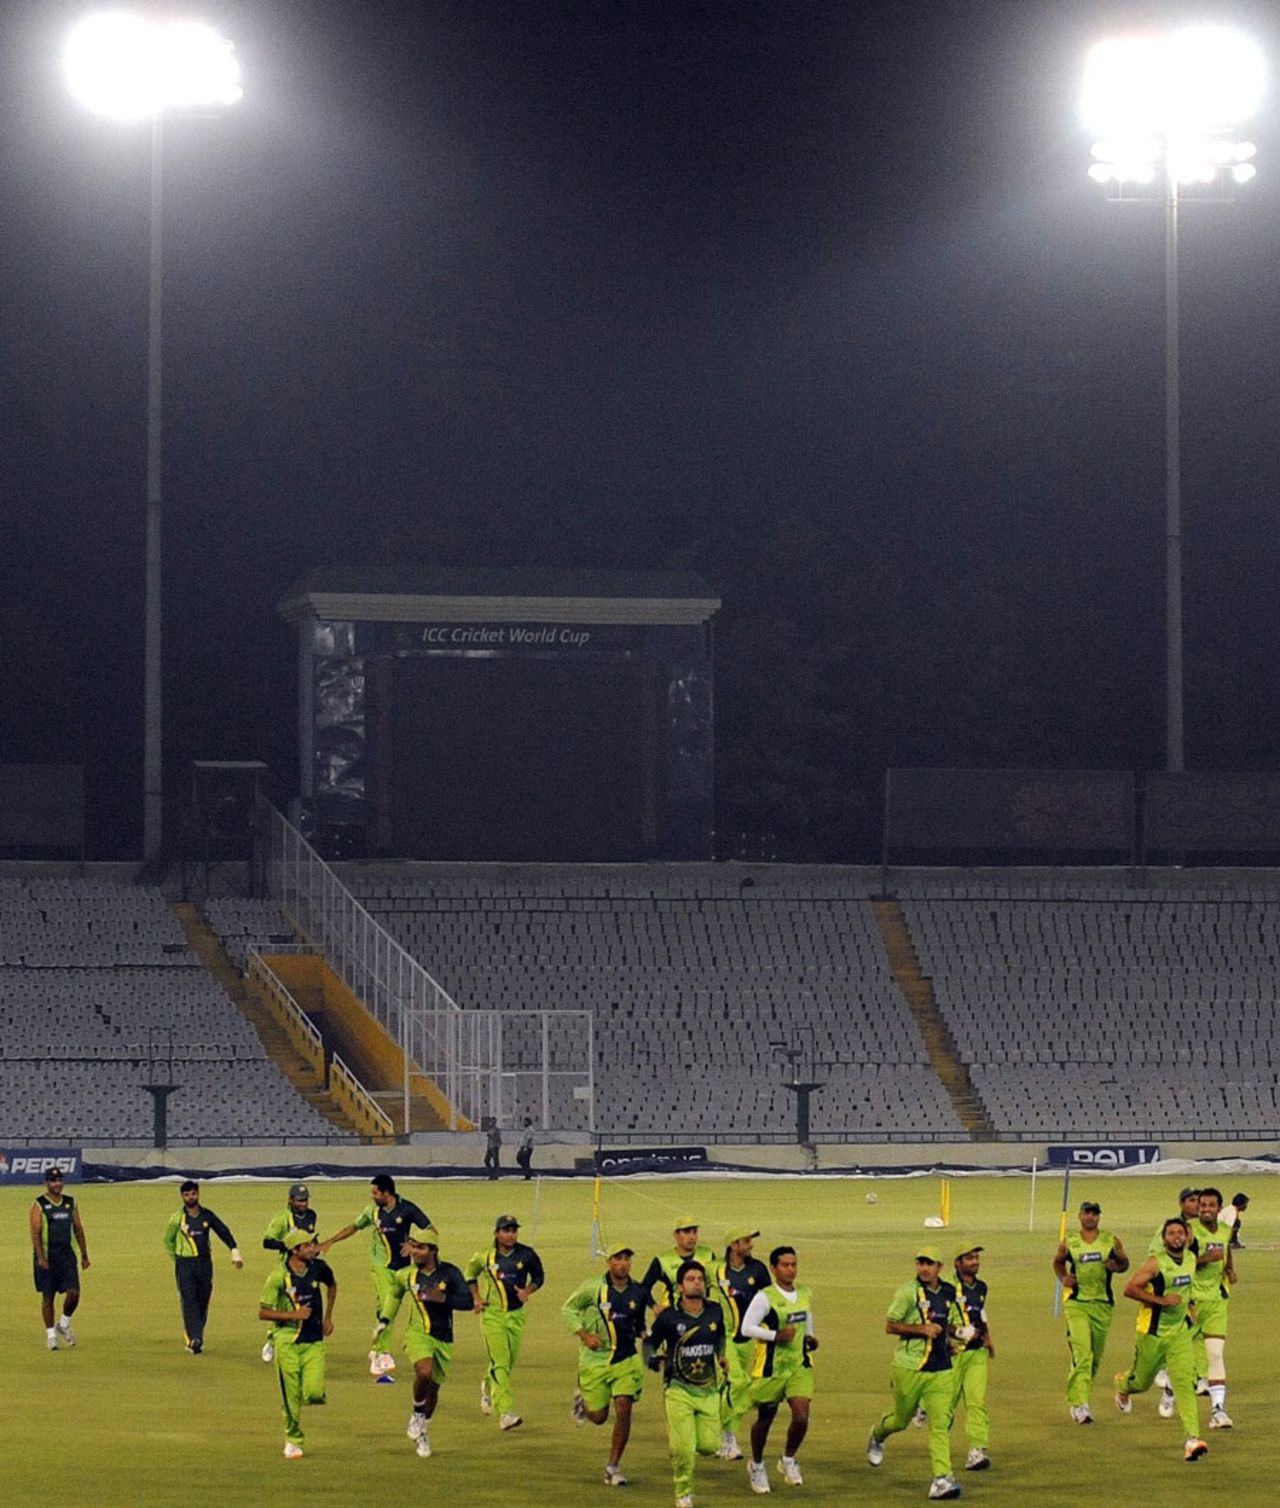 The Pakistan players train under lights at the PCA Stadium, Mohali, March 28, 2011